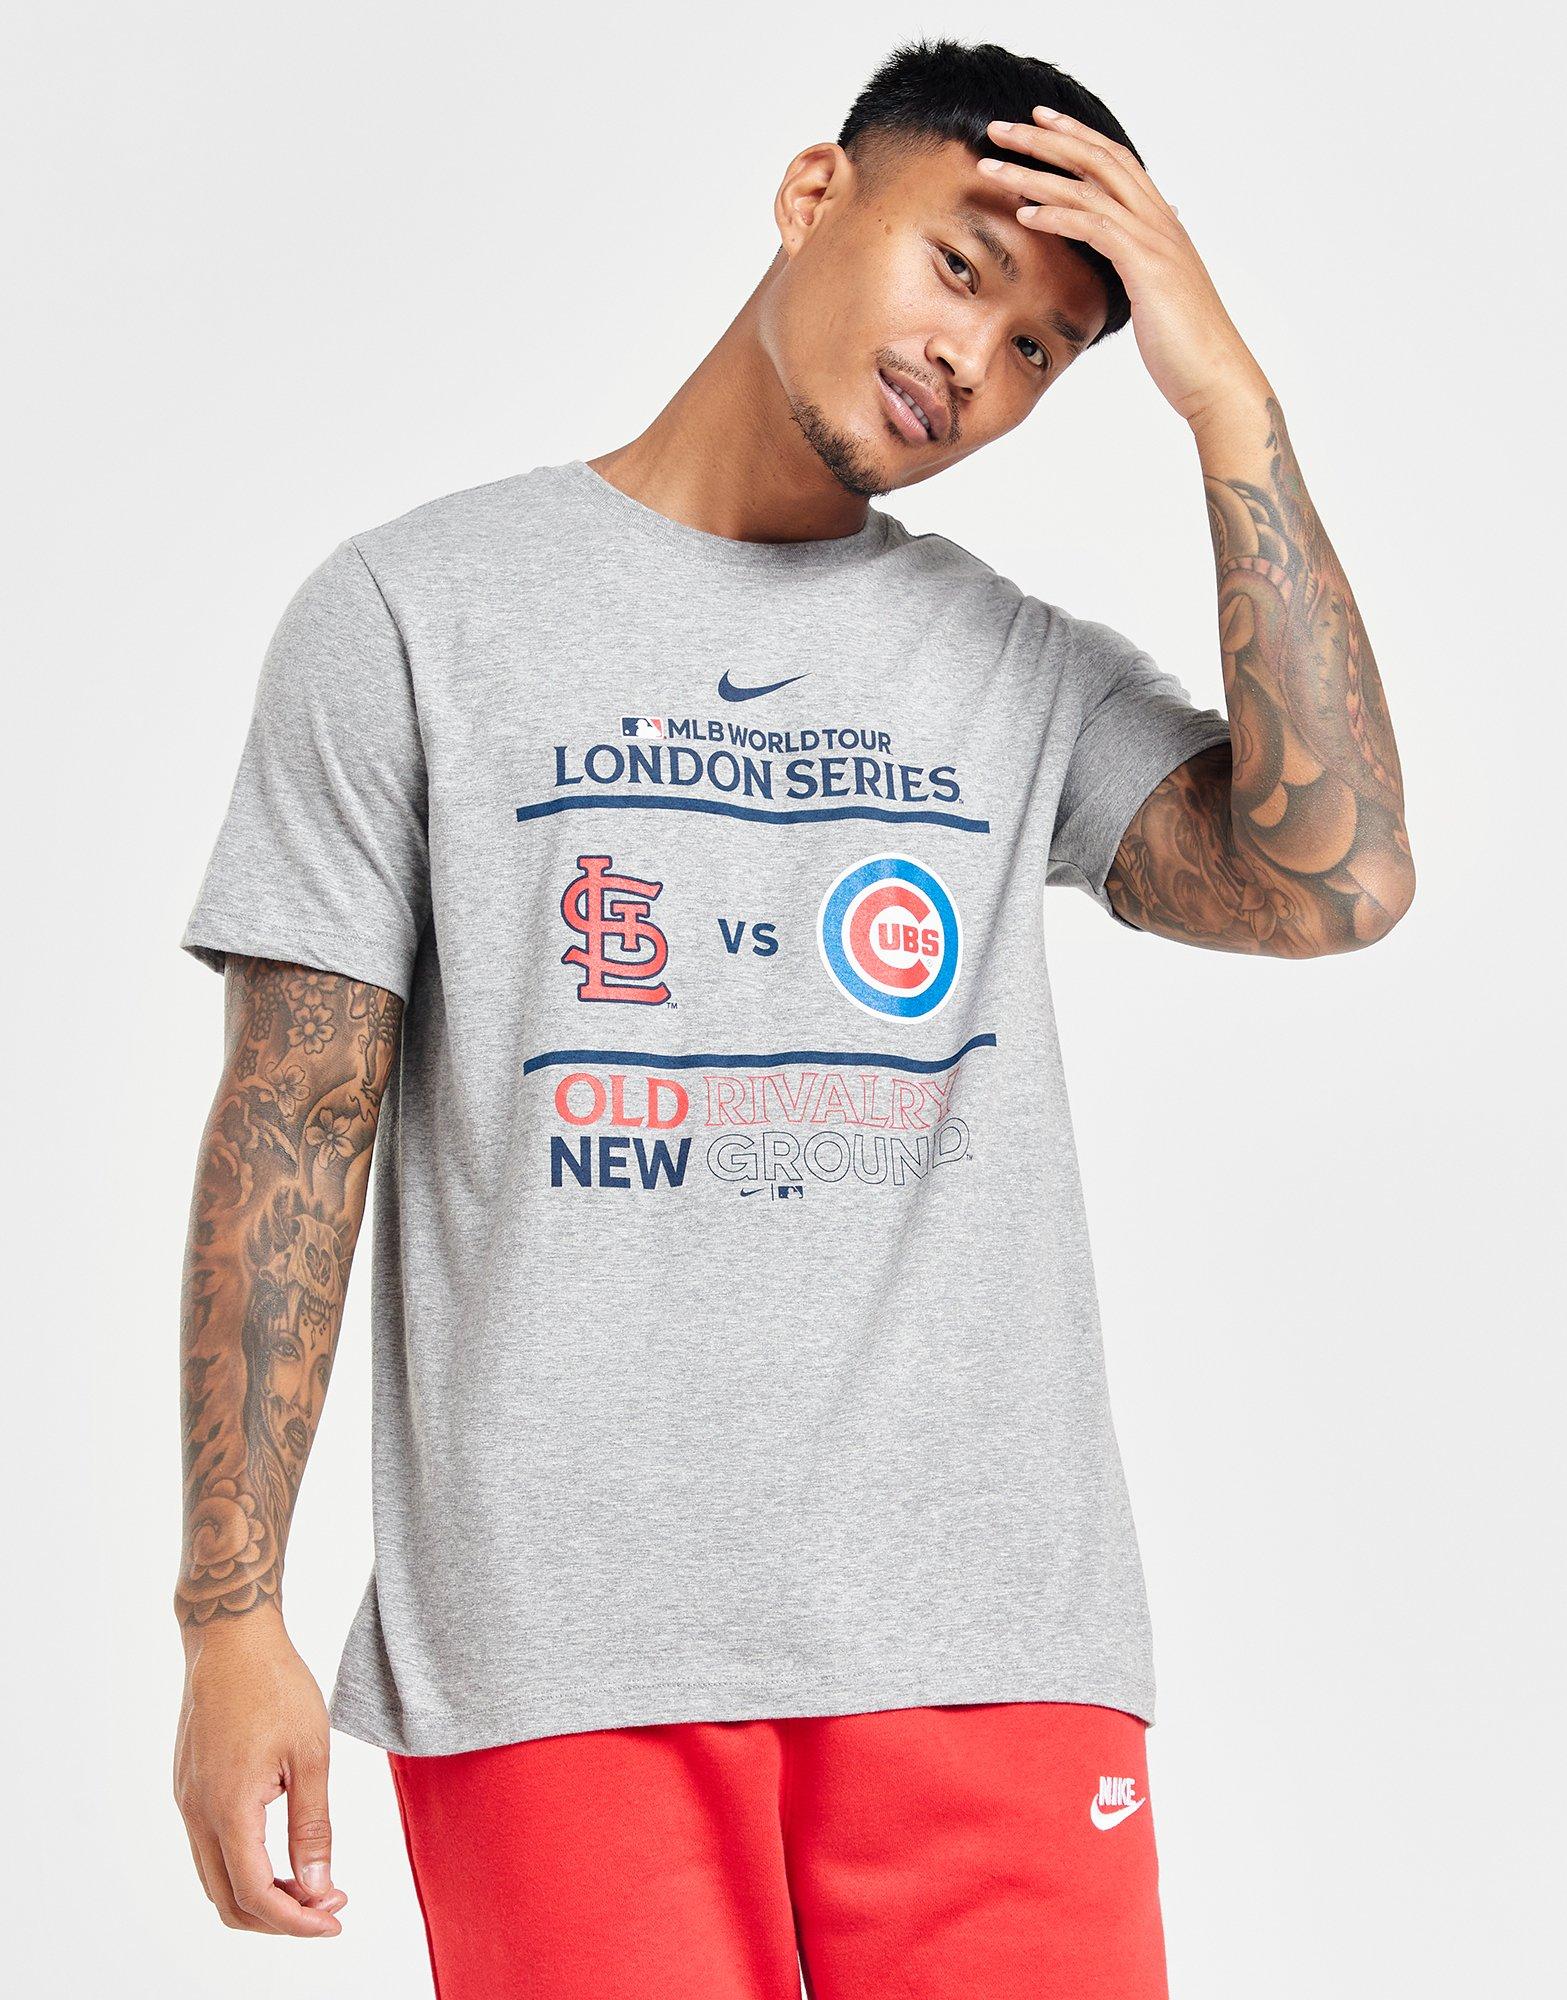 Nike Chicago Cubs Vs St Louis Cardinals 2023 Mlb World Tour London Series  Old Rivalry New Ground Shirt